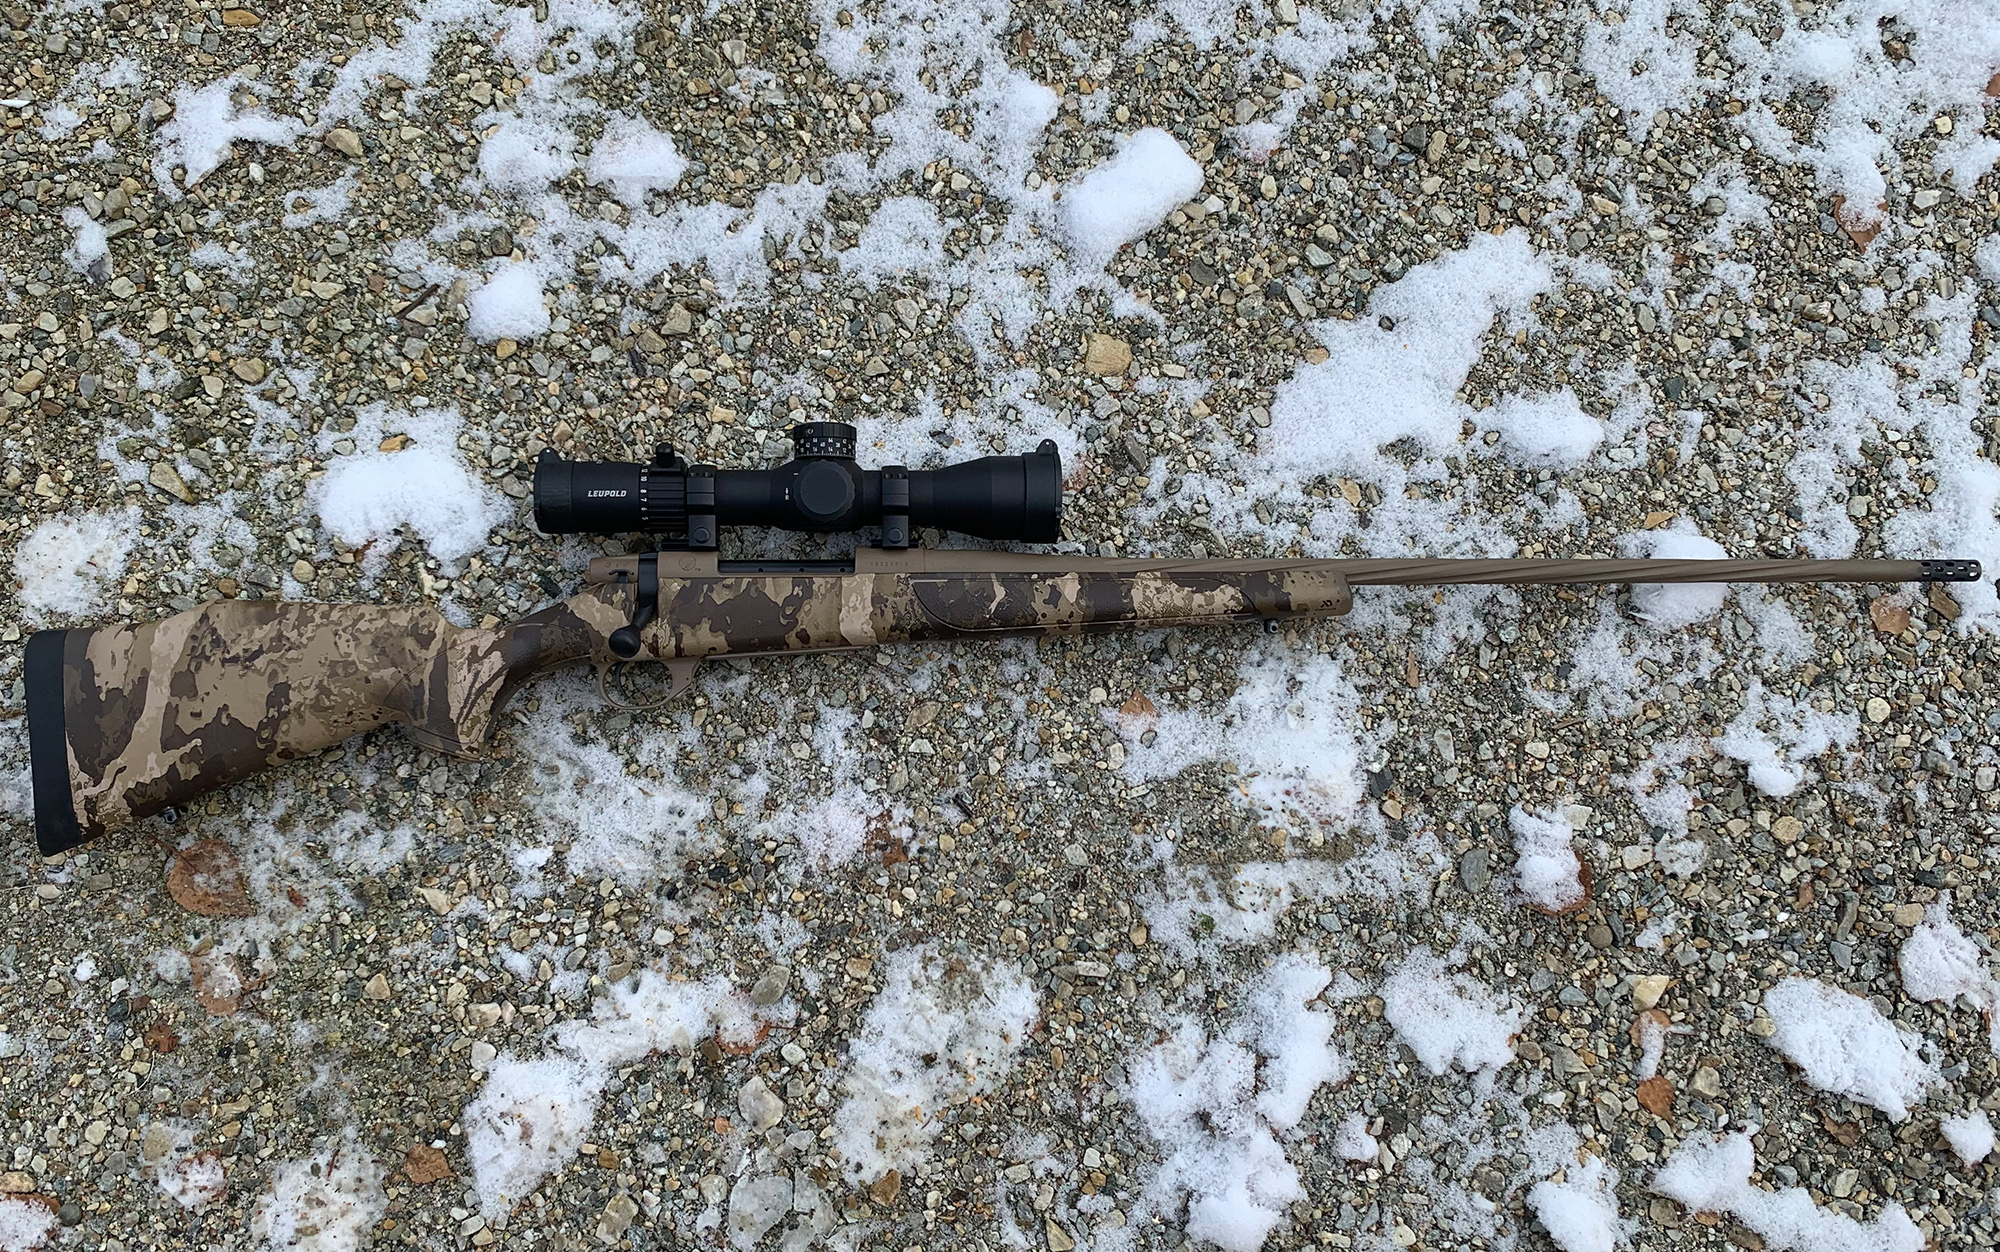 The Weatherby Vanguard First Lite laying on snowy rocks.